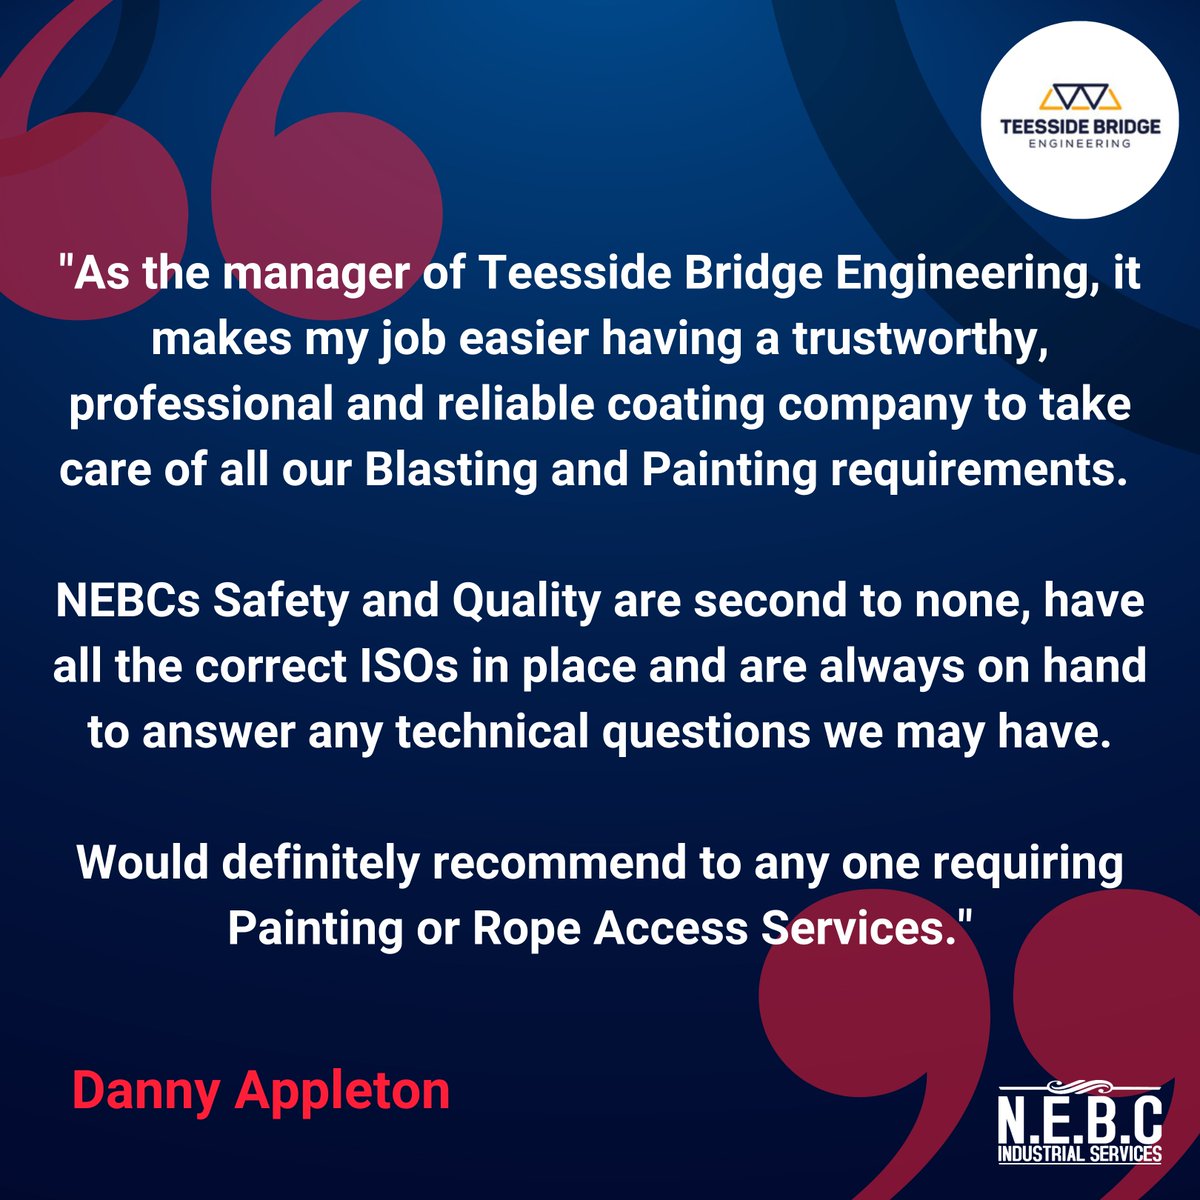 Always good to receive feedback on our work! 💫

It was great working with Teesside Bridge Engineering to provide blasting and painting services.

#blasting #blastingservices #industrialblasting #painting #paintingservices #industrialpainting #safety #qualitycontrol #ropeaccess